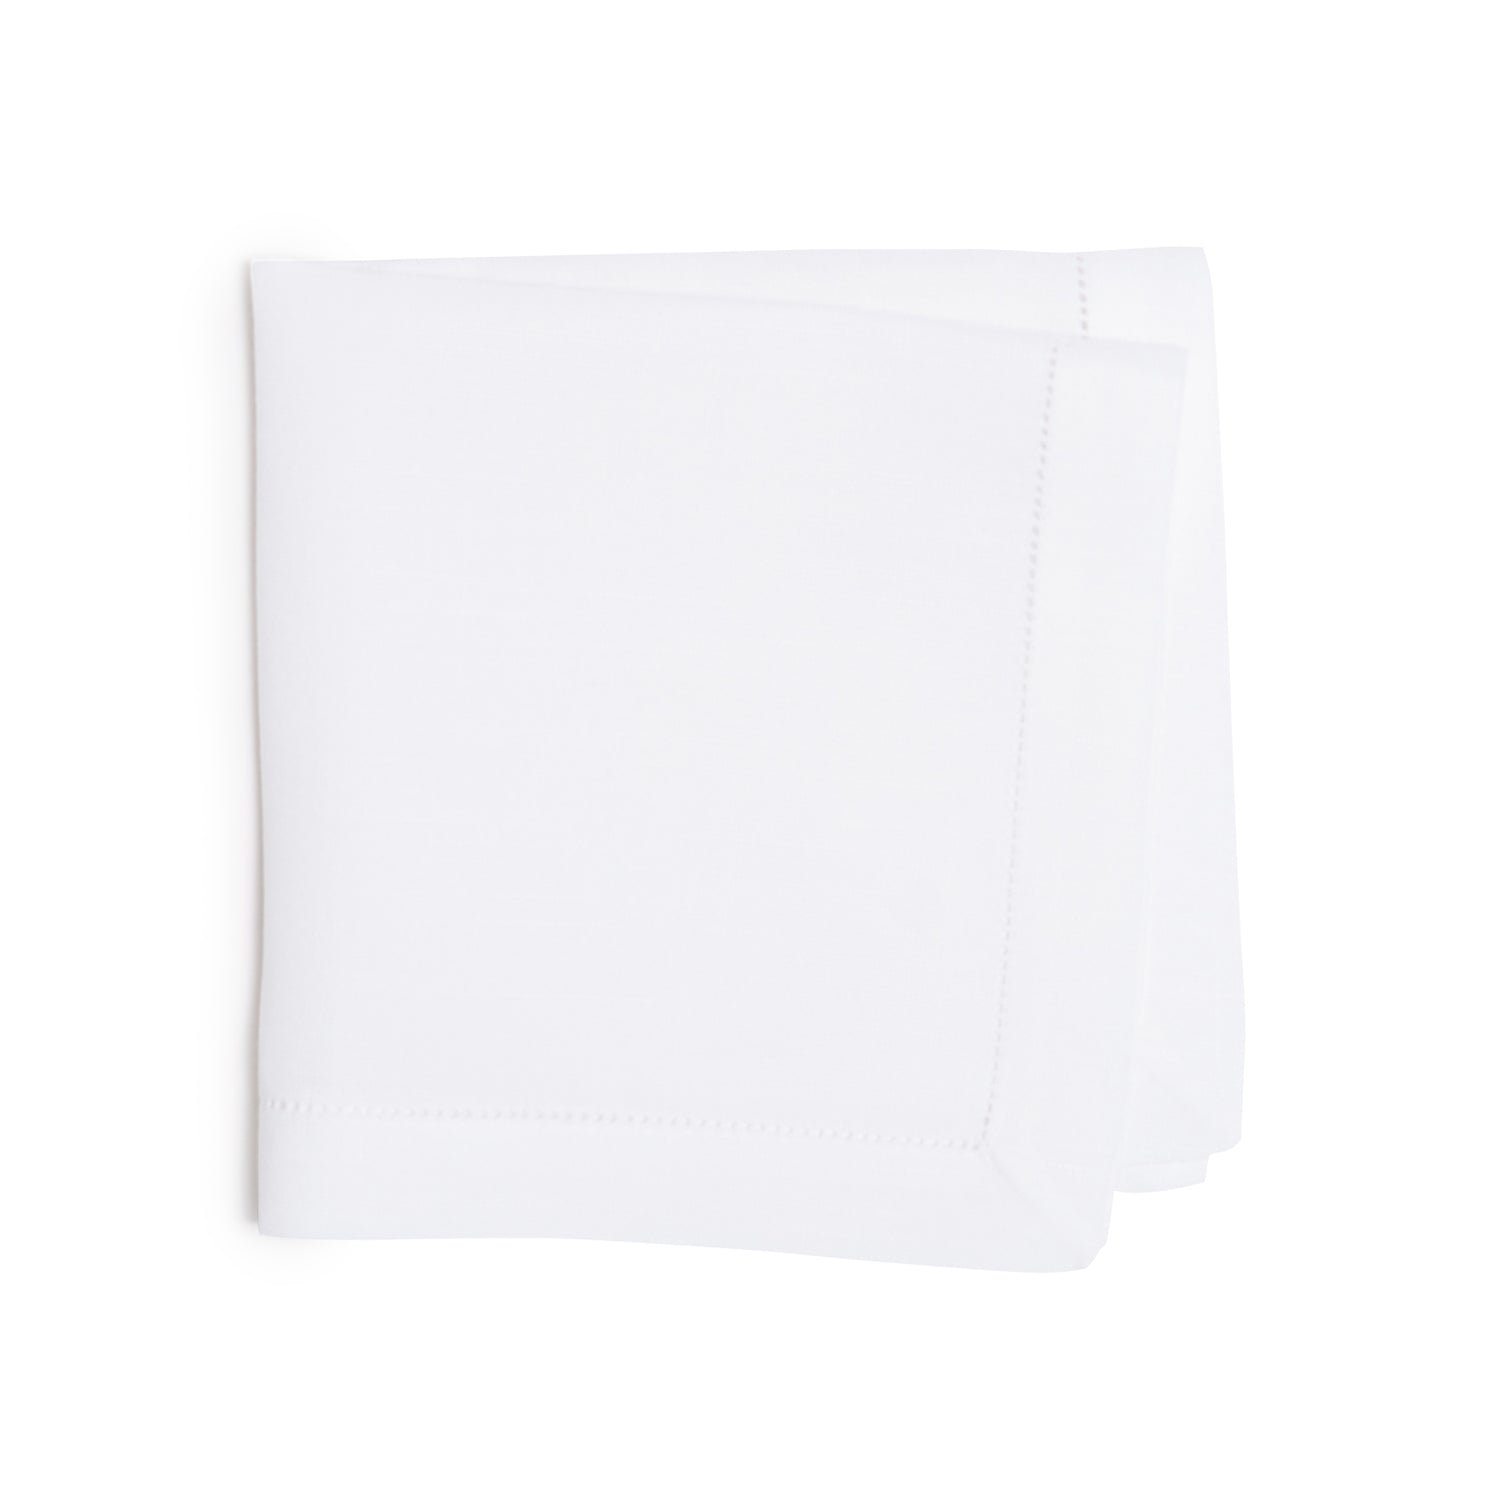 Paramount Poly Faux White Linen With Embroidery Hemstitch Napkin 4Pcs Set